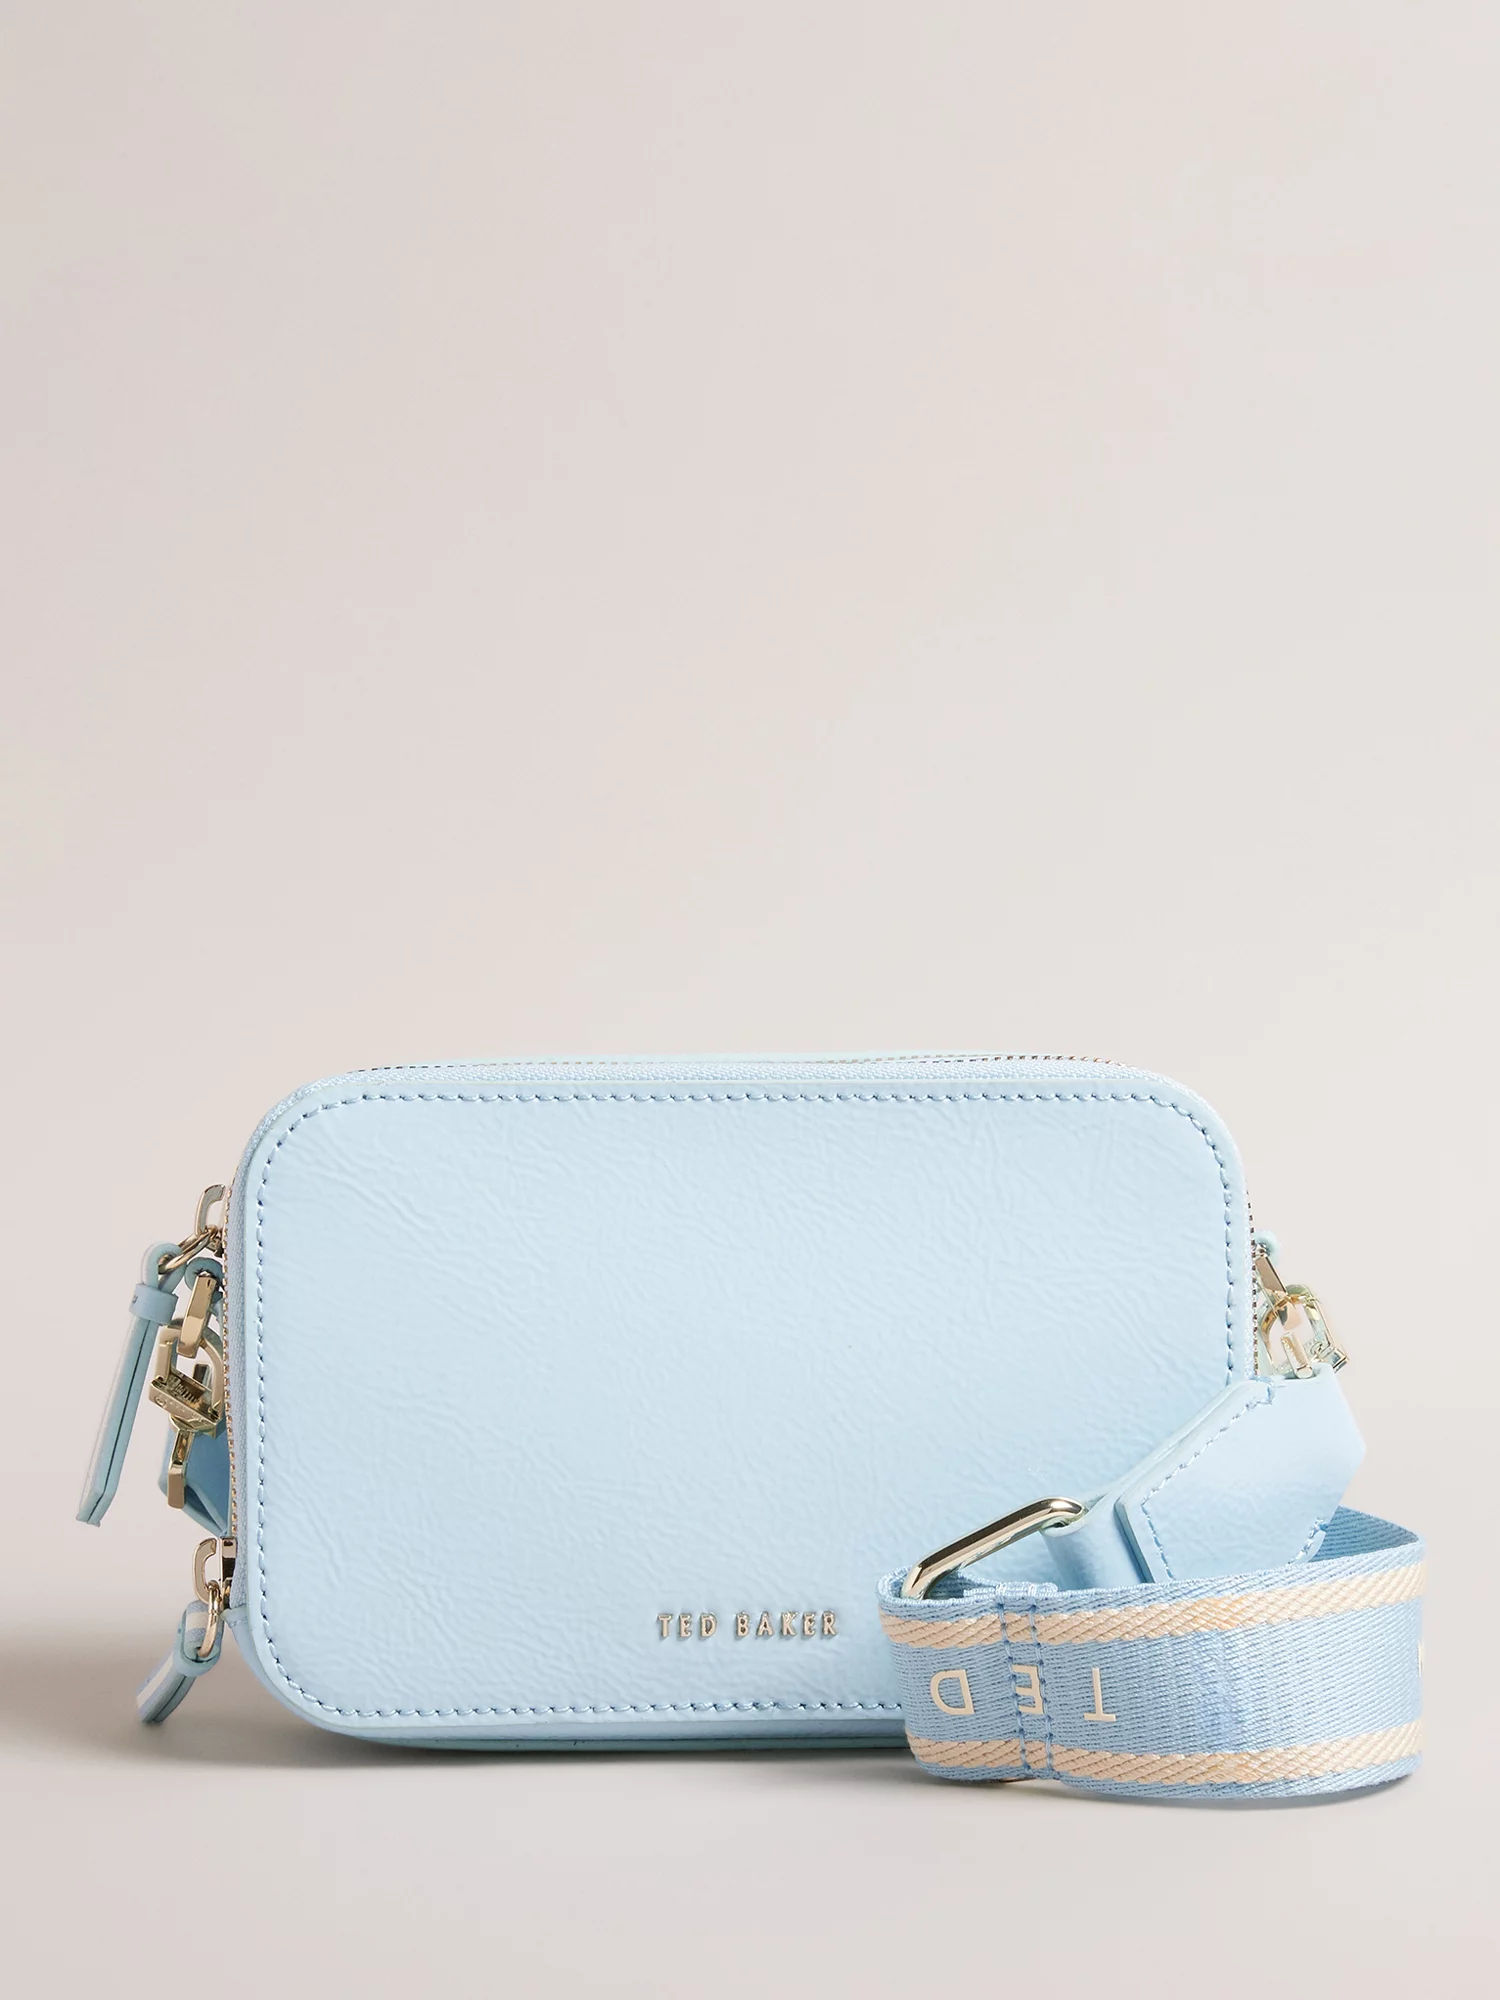 TED BAKER Lilleee Small Zip Around Leather Purse in Pink Hot | Endource